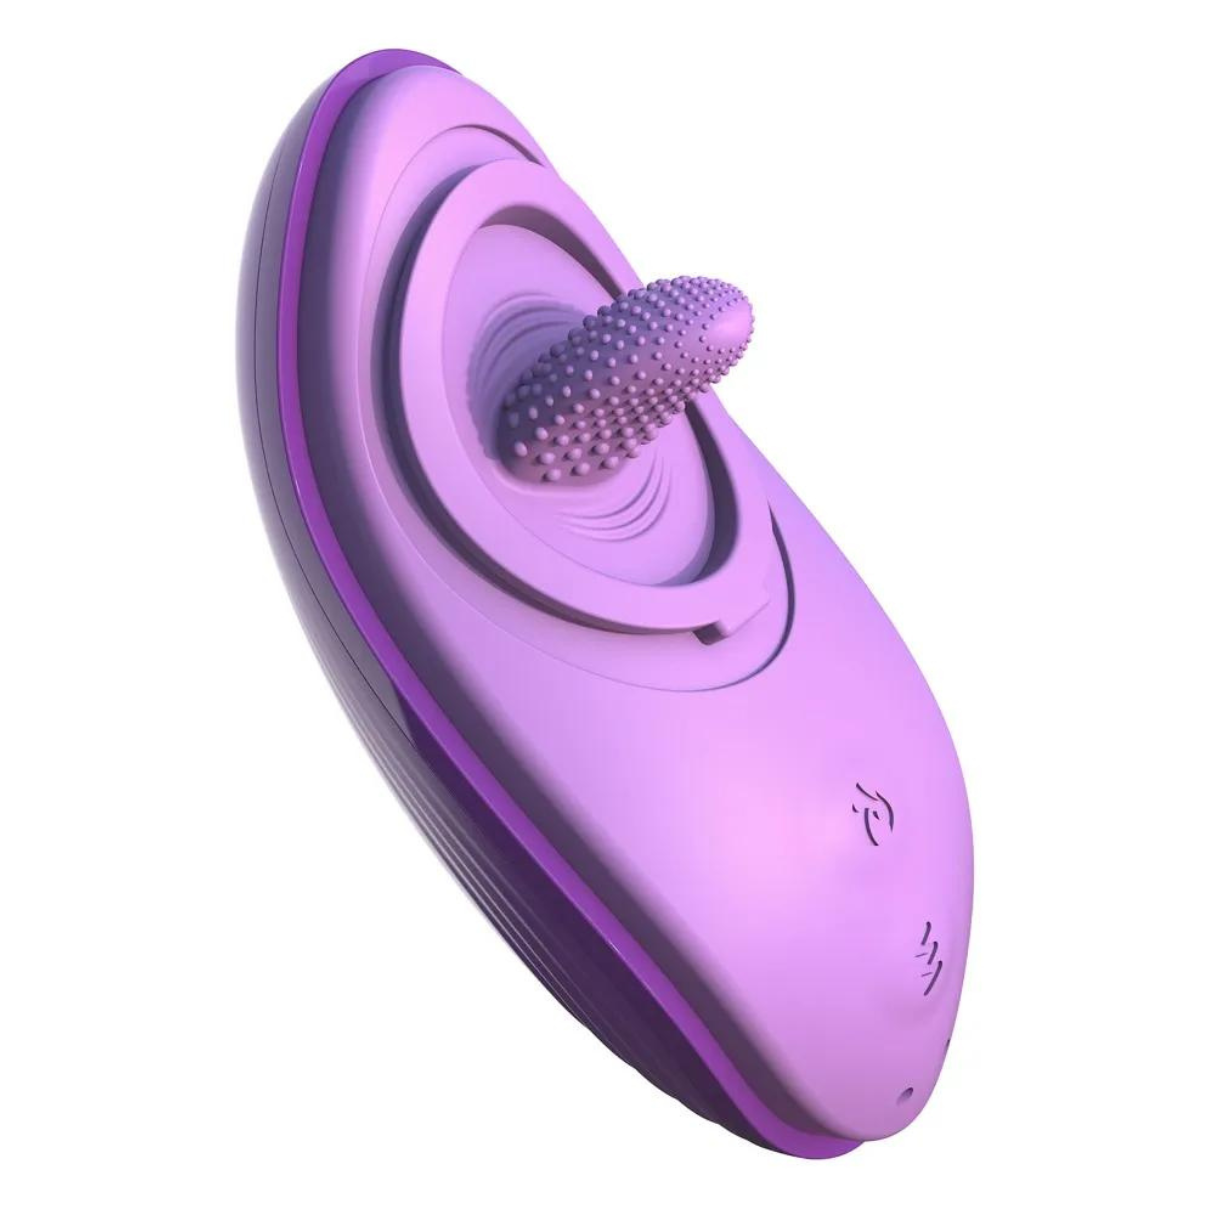 FOR Her FANTASY Vibrator Tongue Silicone HER Fun